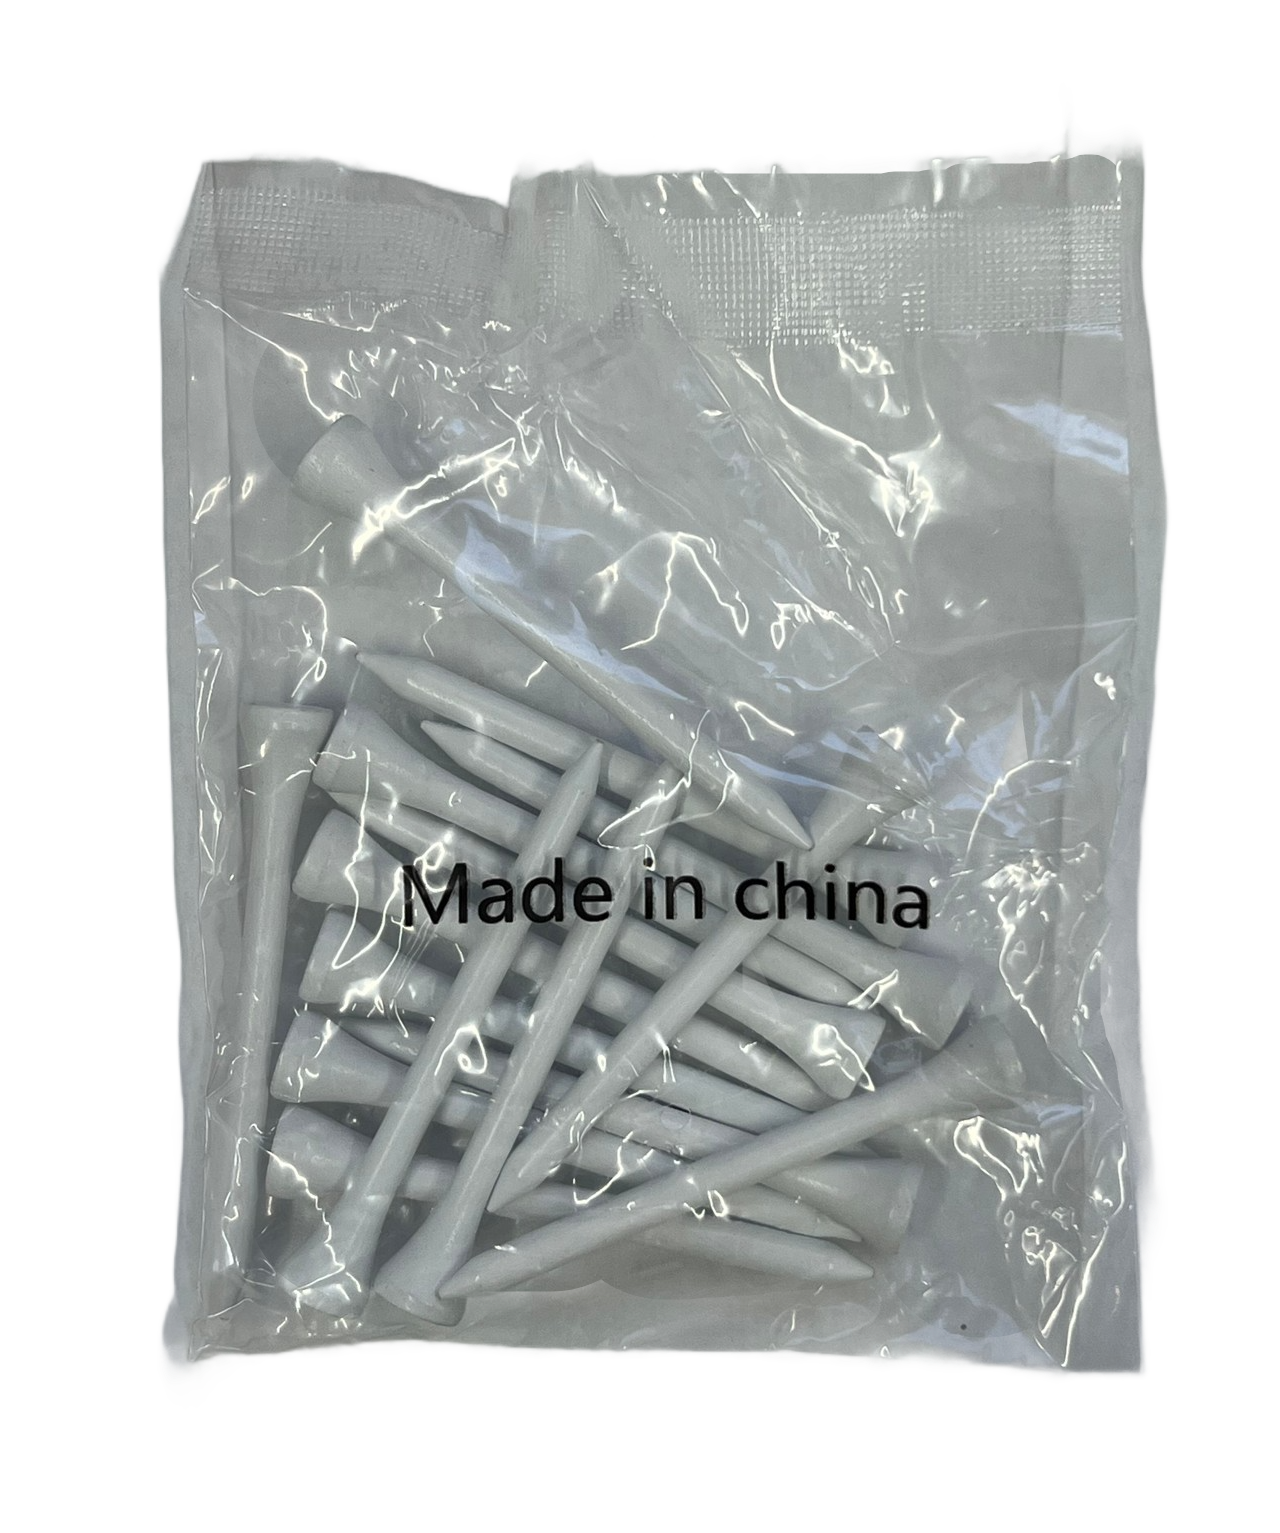 3 1/4" - 15ct wooden tee bags - Say "Made in China" - Clearance